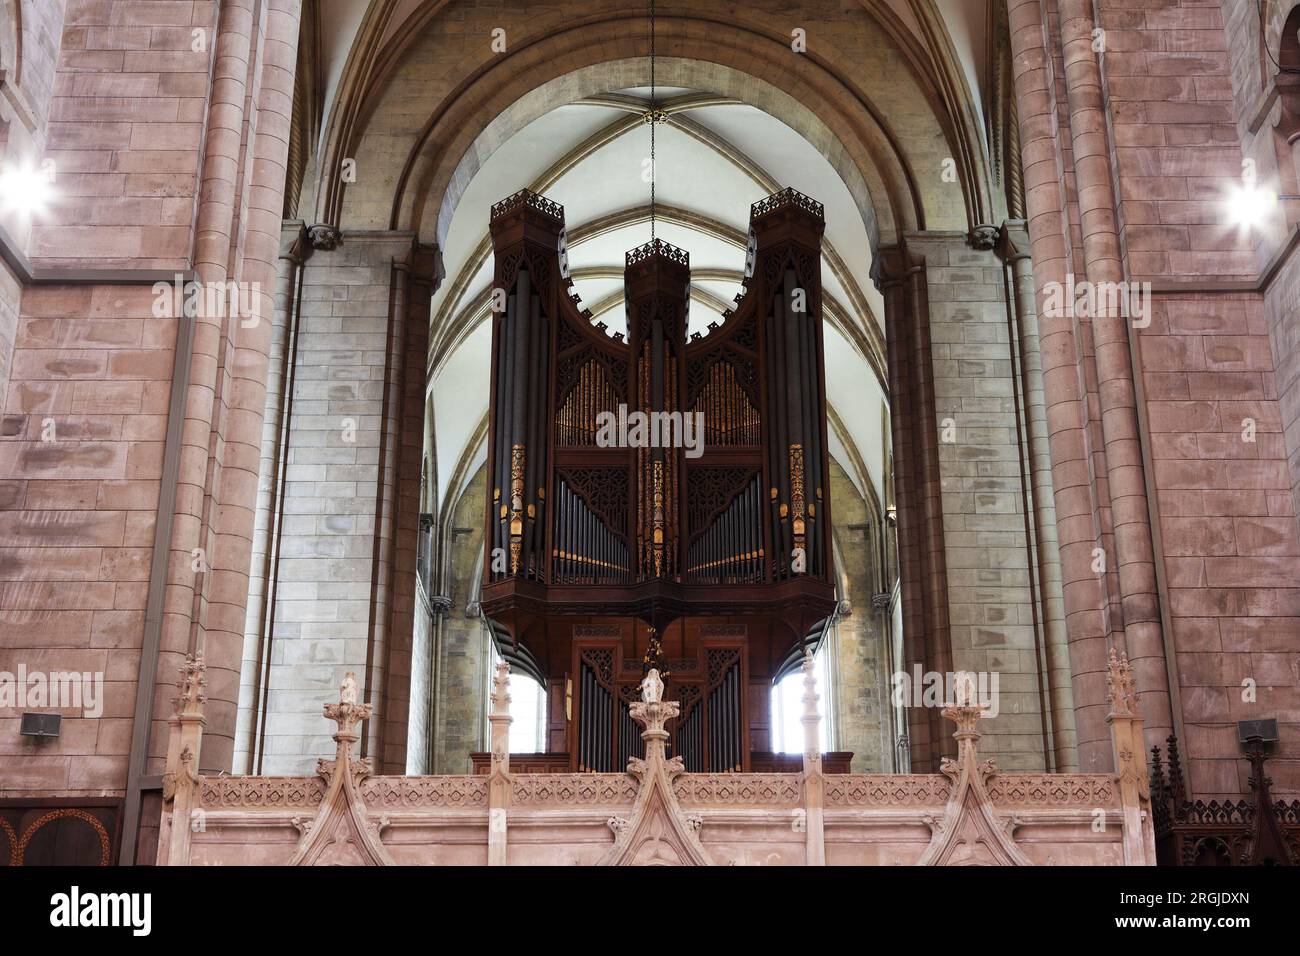 The Organ and Pipes, set within Chichester Cathedral, West Sussex, England. Stock Photo